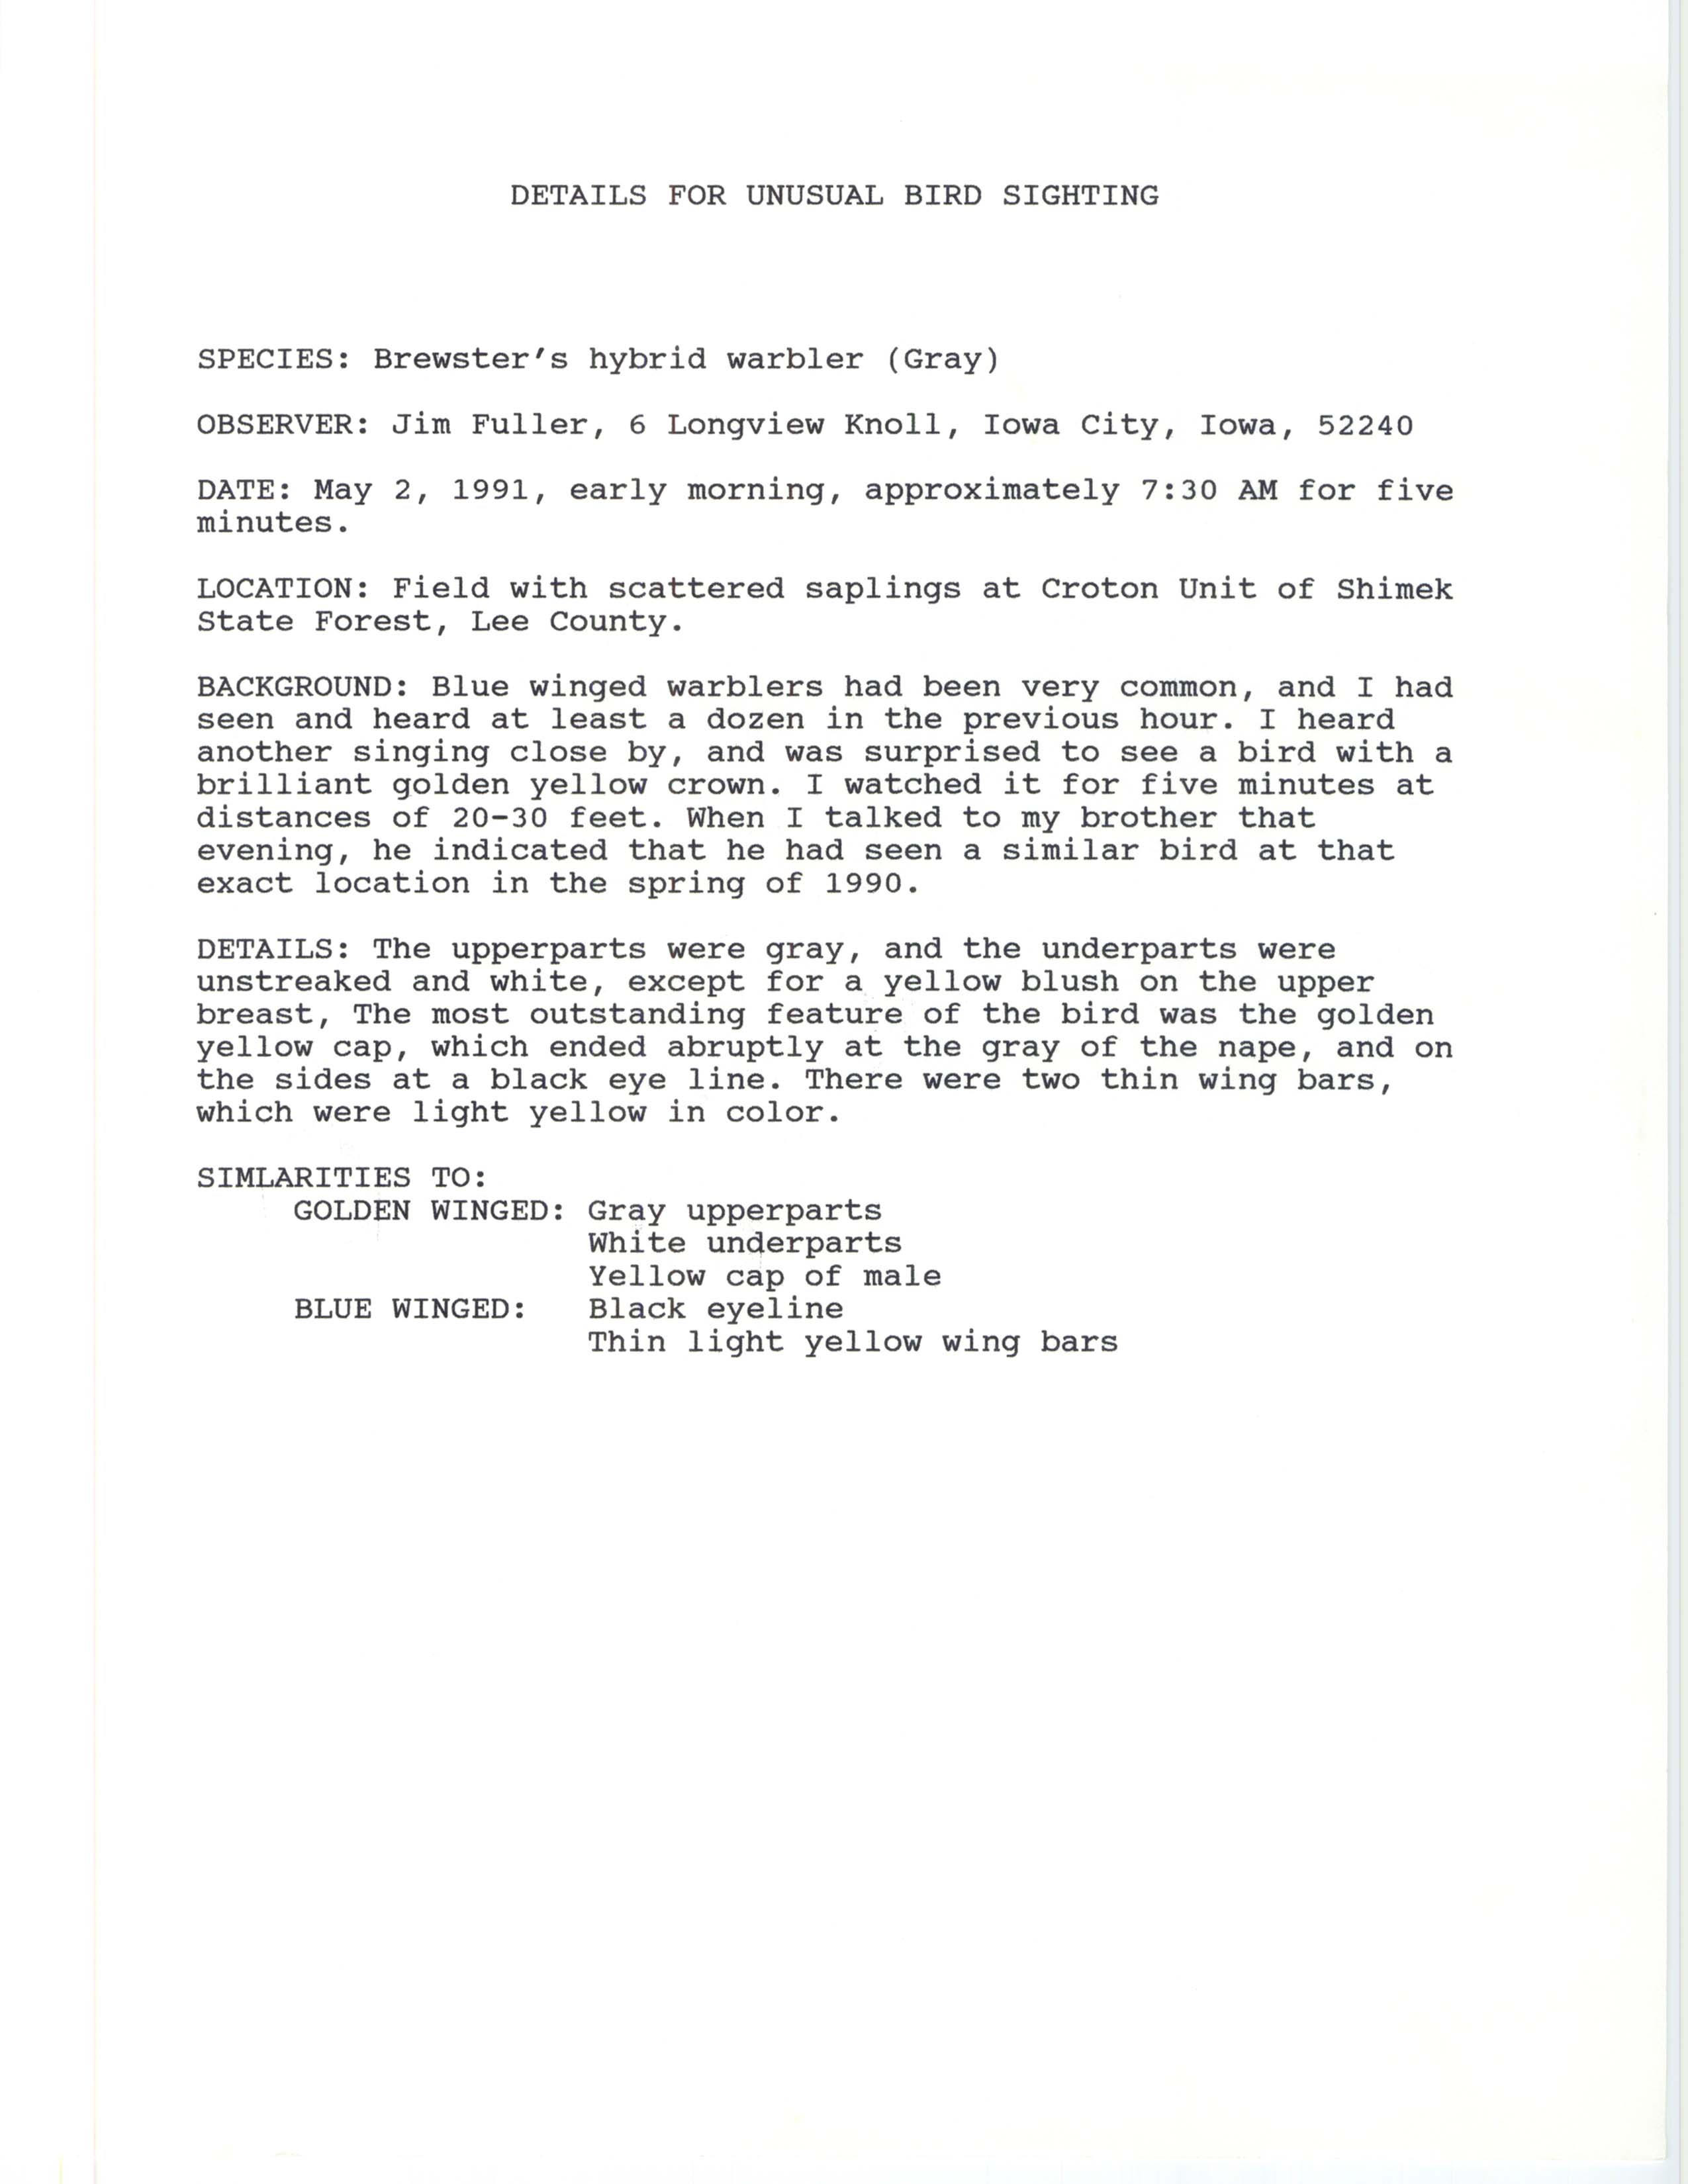 Rare bird documentation form for Bewster's Warbler at the Croton Unit of Shimek State Forest, 1991